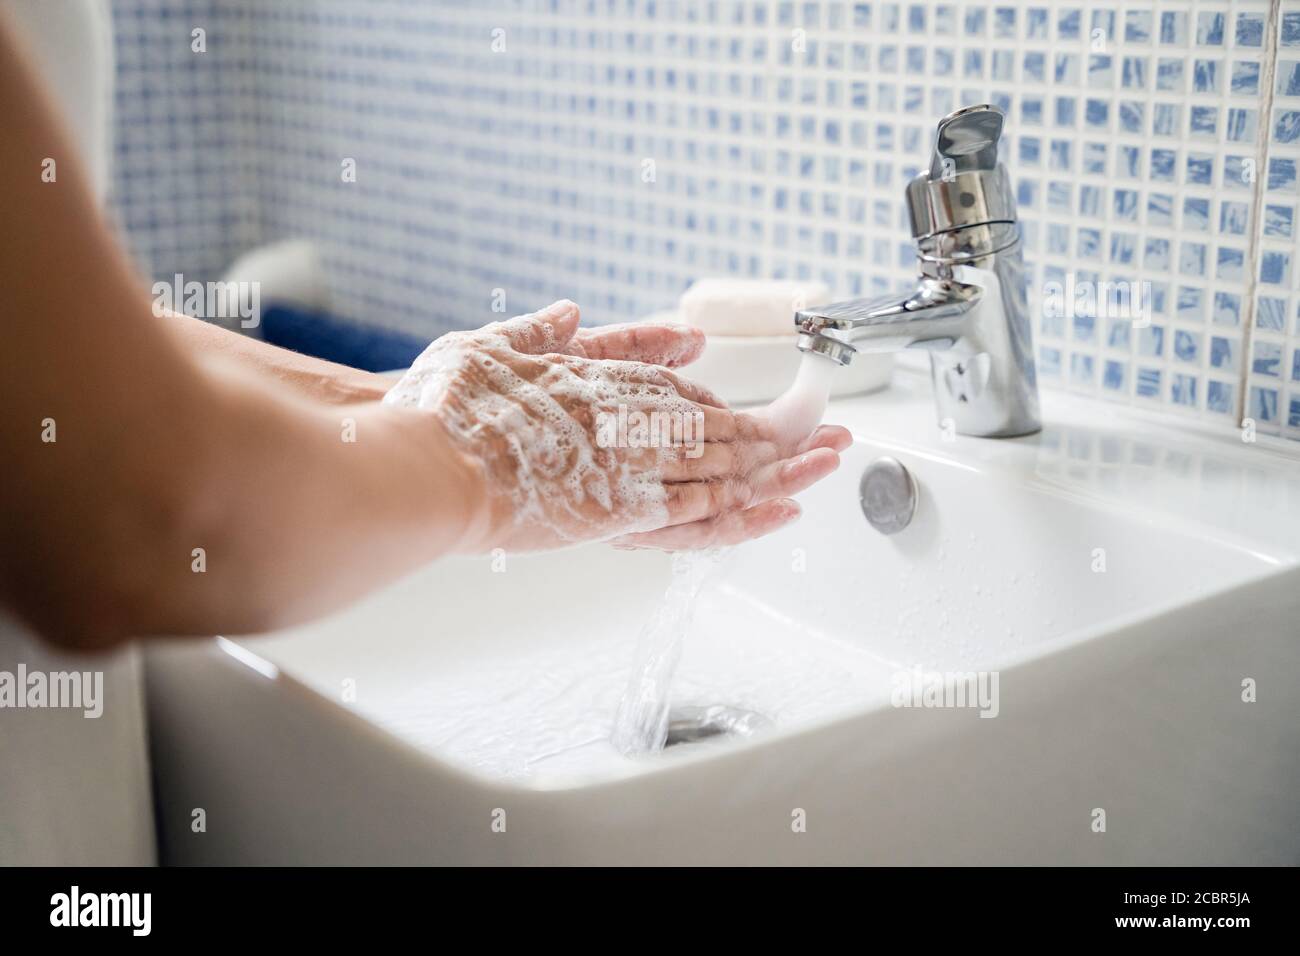 Young woman washes hands in bathroom washbasin under running tap water. Rubs hands together with soap Stock Photo